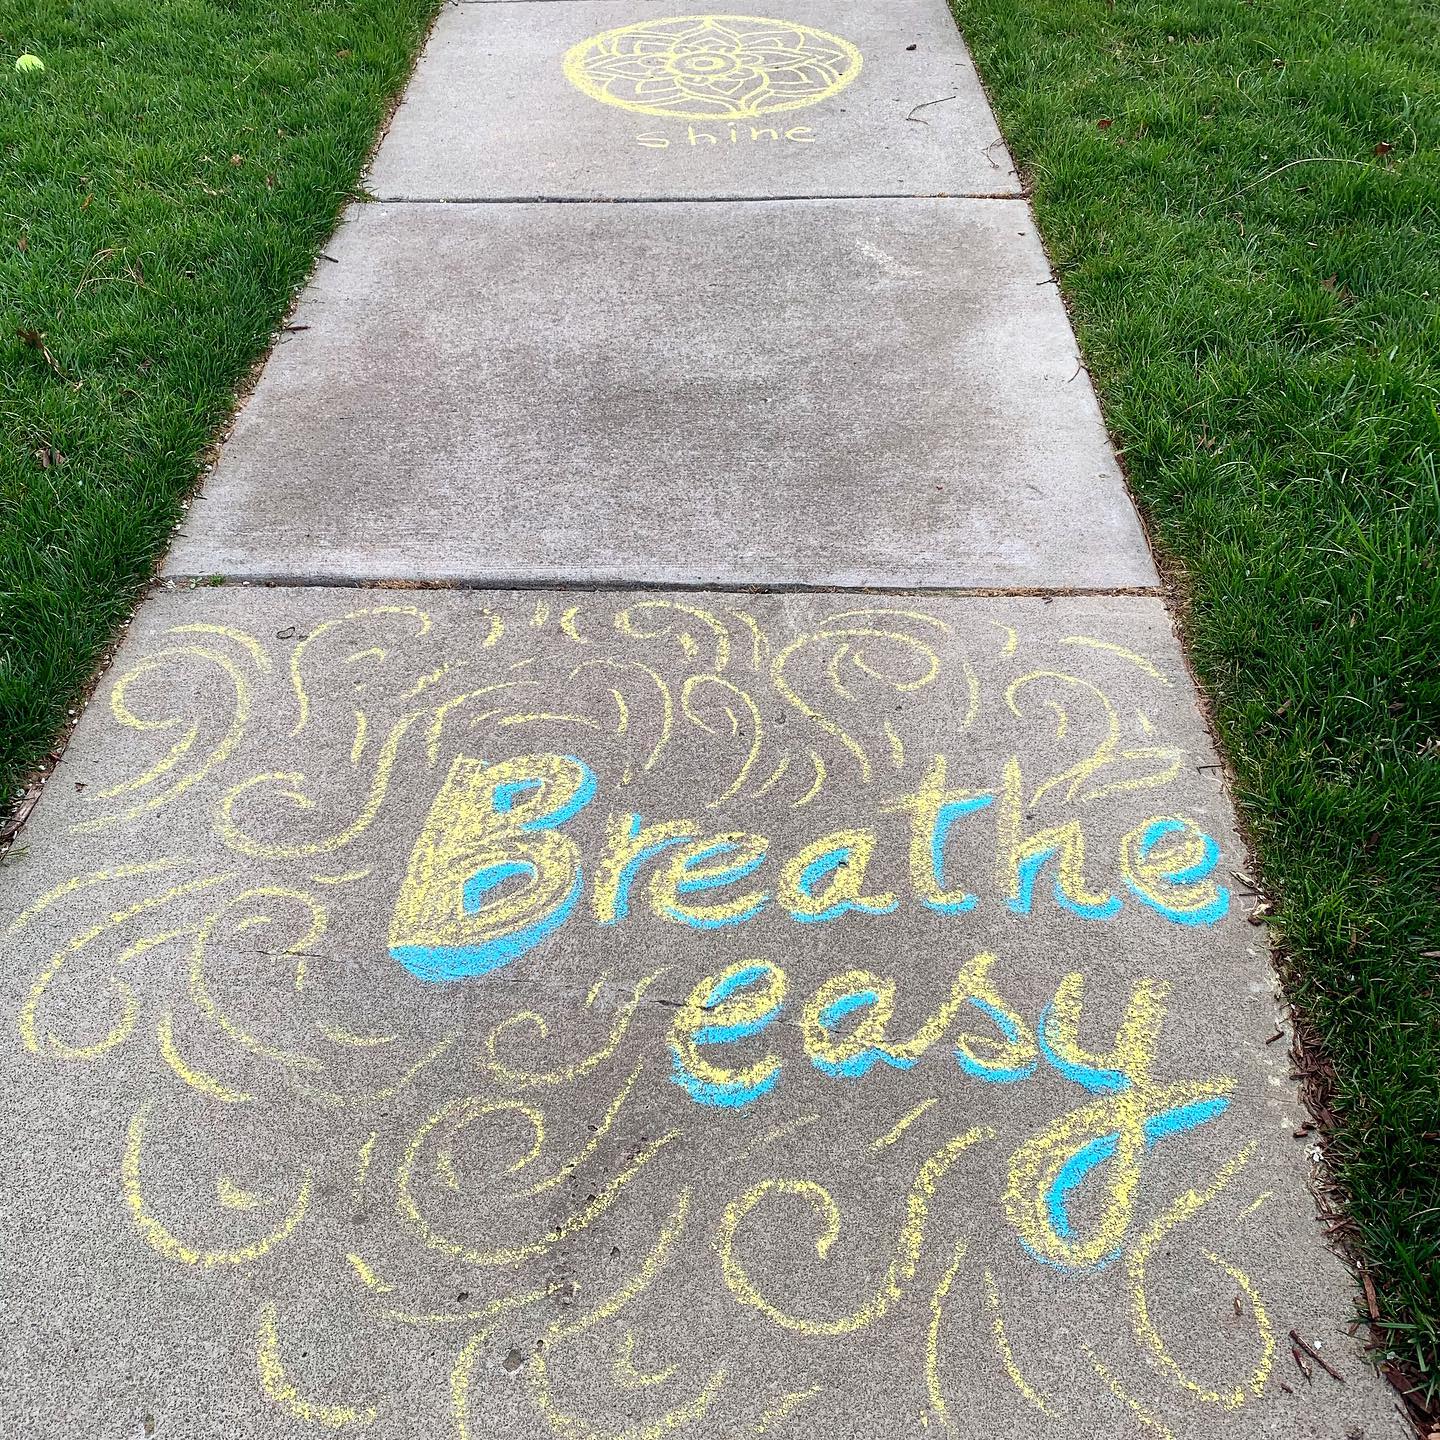 Time to take out those chalks and write something positive on your sidewalks! What say?